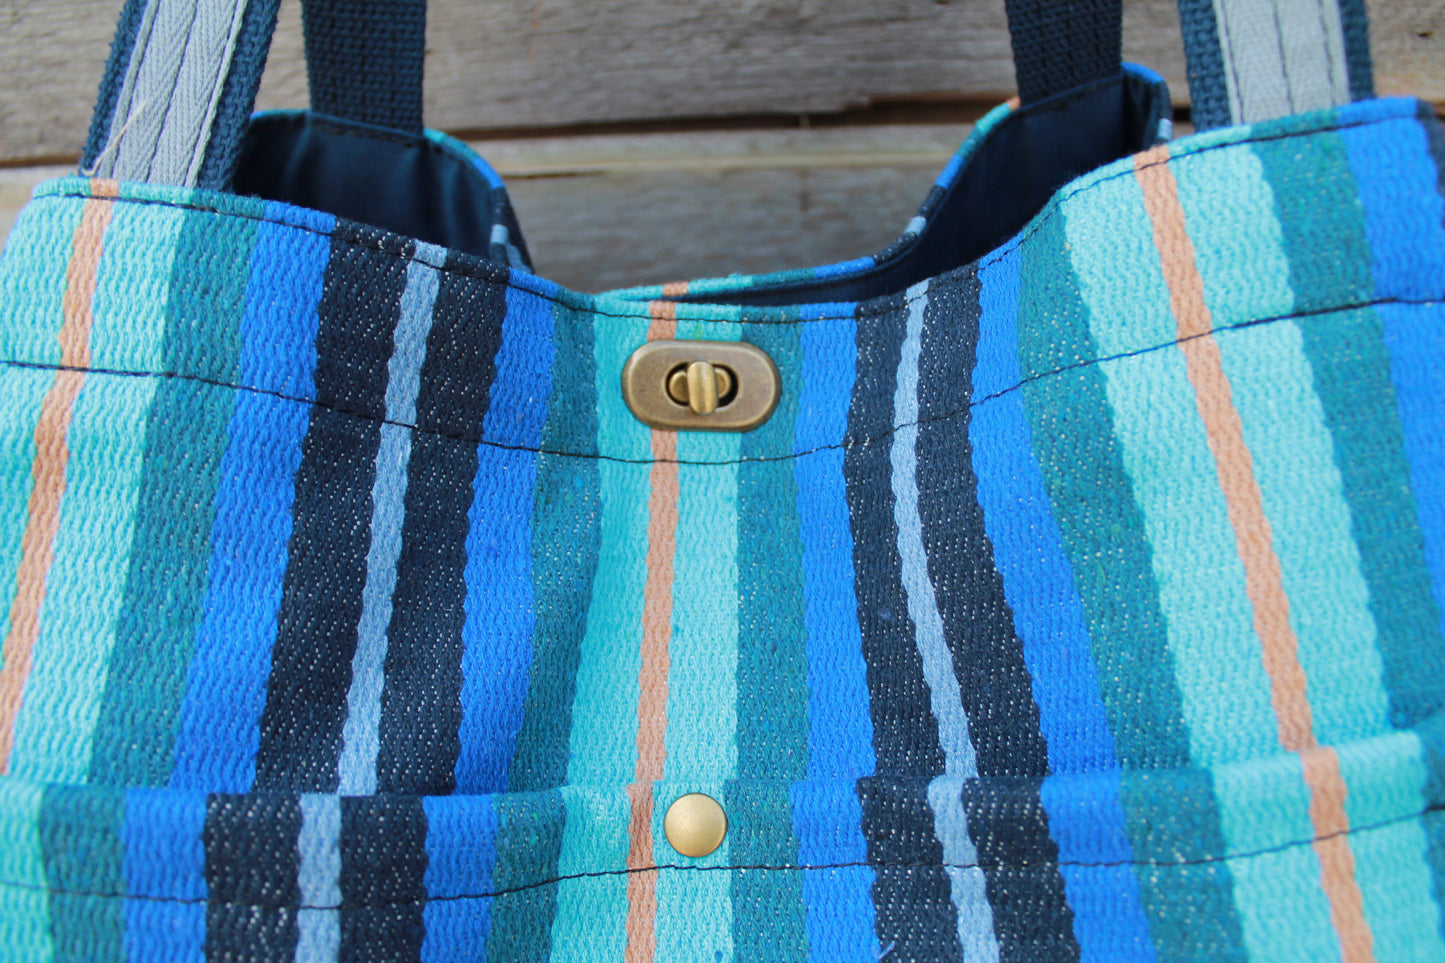 Day Tripper Mega Tote made from recycled cotton and recycled water bottles